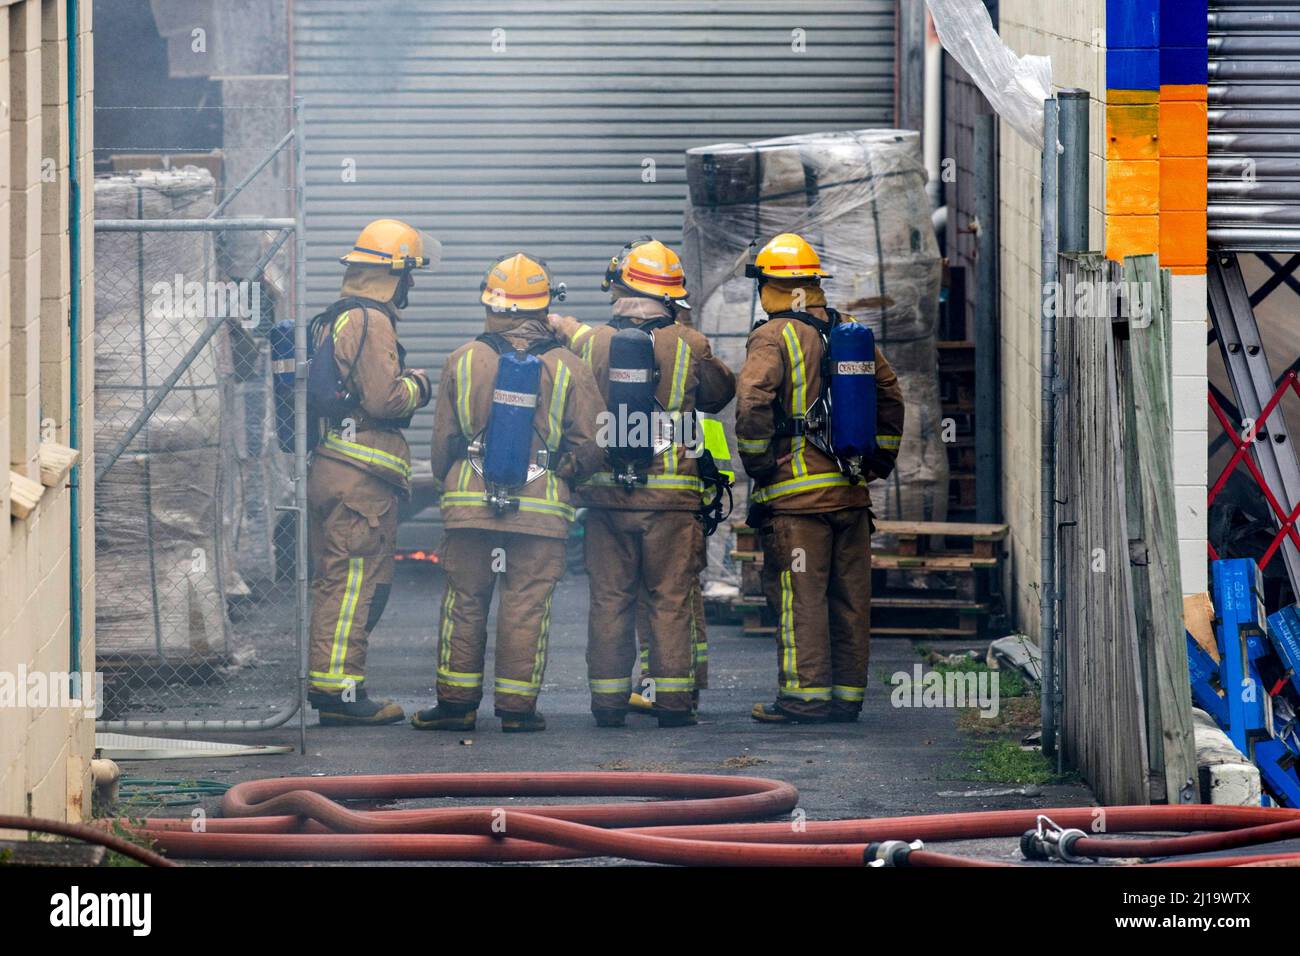 Serious Fire at Mitre 10 Store, Onehunga, Auckland, New Zealand, Monday, December 08, 2008. Stock Photo